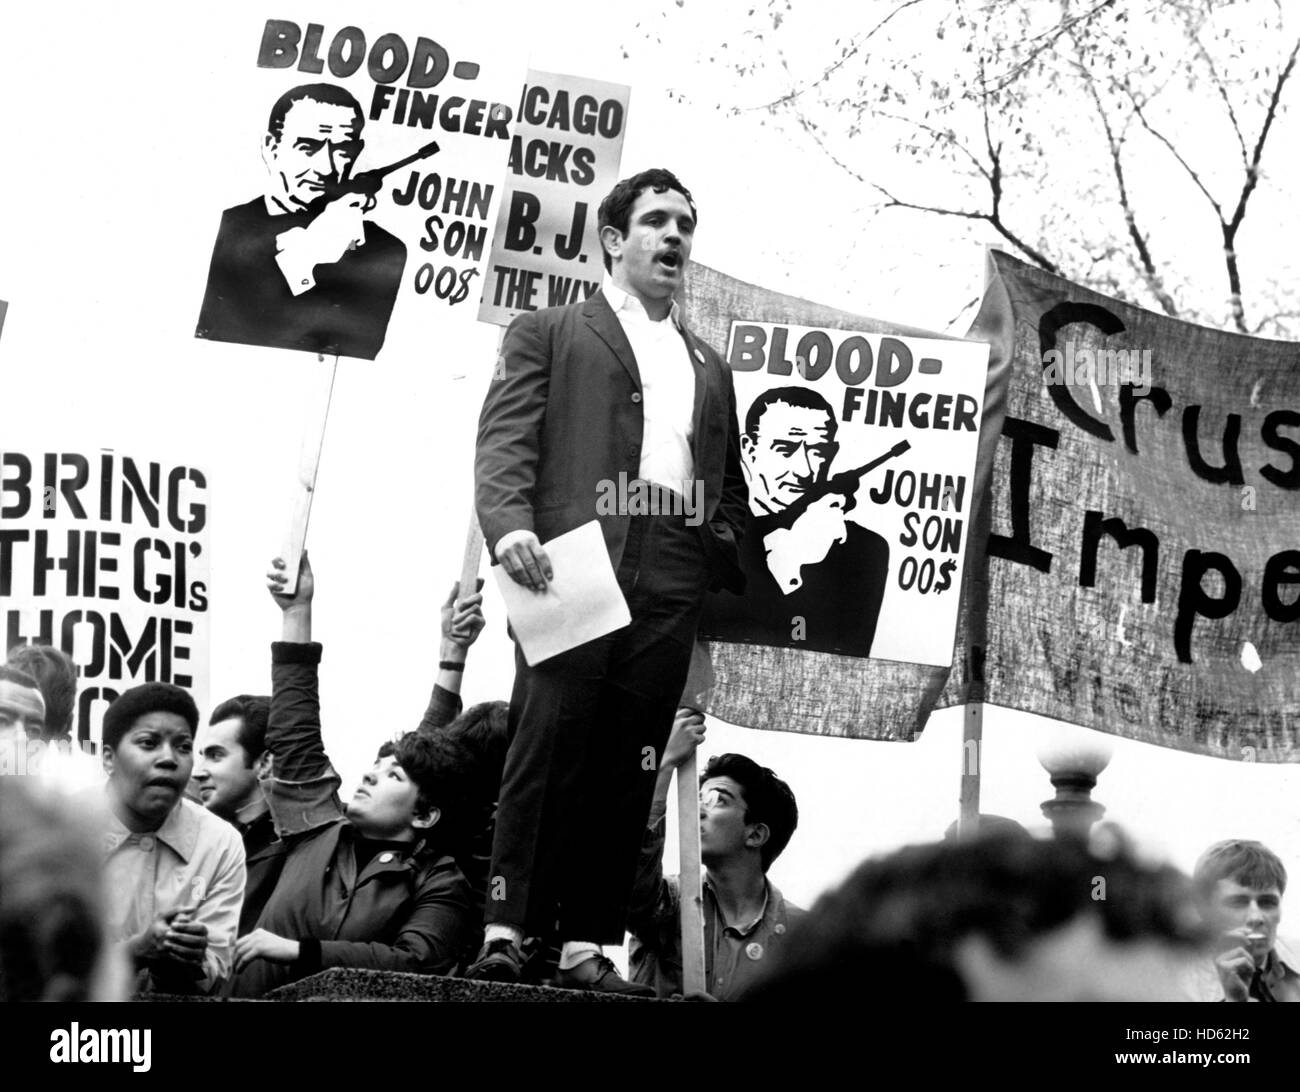 POLITICS: THE OUTER FRINGE, Steve Baum (center), with demonstrators in Chicago, aired 05/27/66 Stock Photo